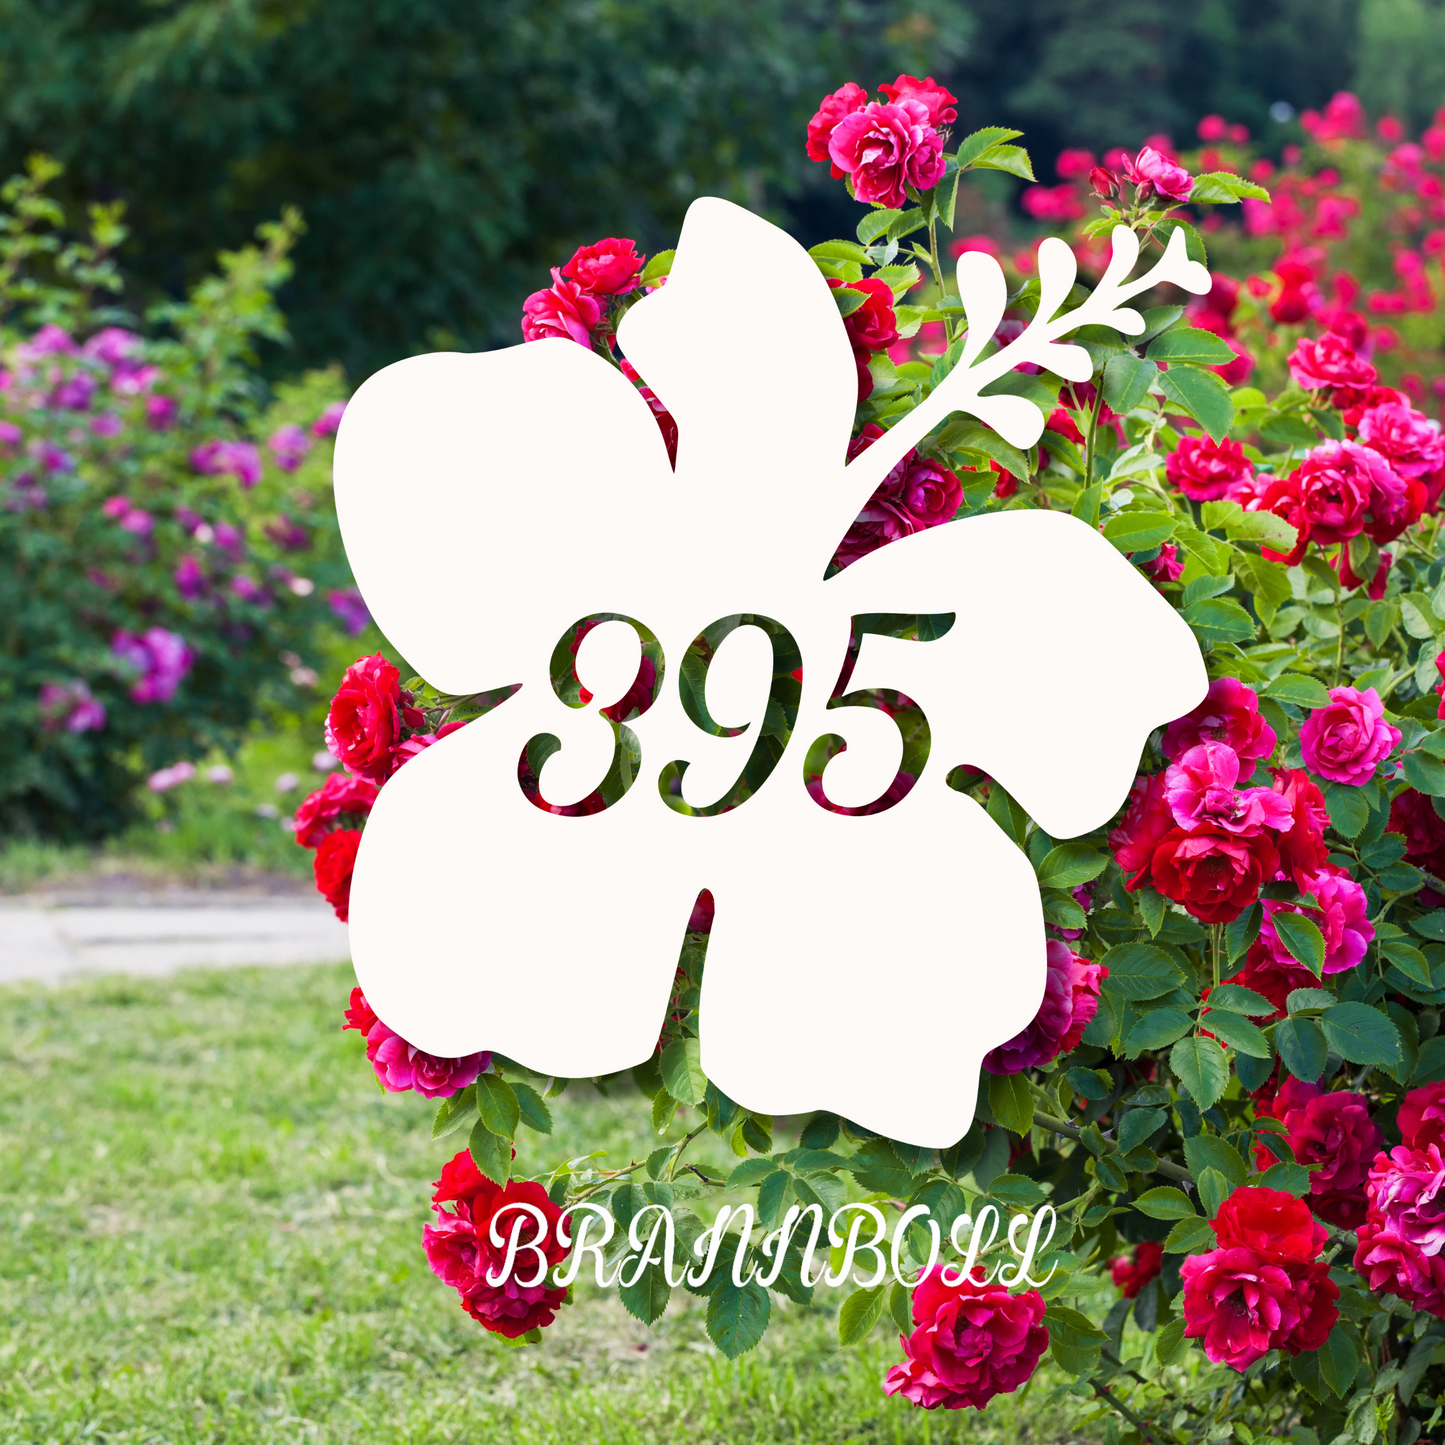 House Number Plaque - Hibiscus, Address Plaque, Custom, Personalized, Housewarming Gift, Tropical, Outdoor Decor, Ships Free To Mainland USA